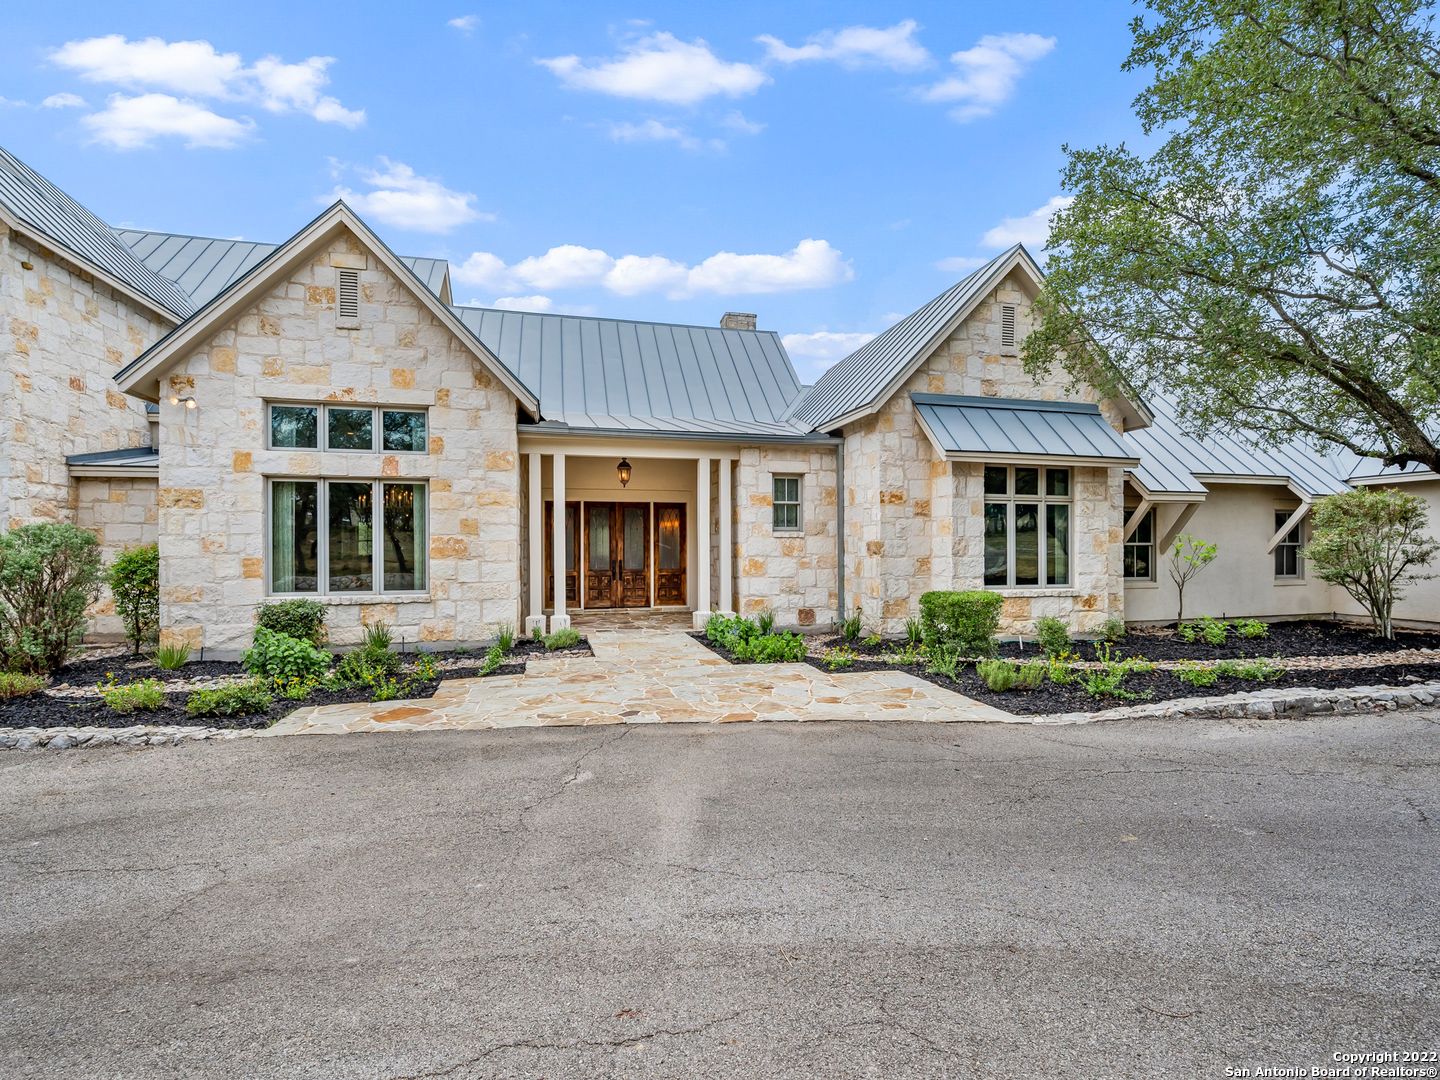 Handcrafted Texas Hill Country estate meticulously designed by Mac Chesney and built by Michael Scholl. Extreme privacy is exemplified once you enter through the guarded gates of Greystone, then through your own private gate within your residence. This estate finds the perfect balance between luxury and functionality. Unsurpassed craftsmanship and materials are harmoniously combined to create stunning living spaces. Hand selected with only the finest appointments throughout to include hand scraped hard-wood floors, custom ceiling and architectural details throughout, custom solid wood cabinetry and exotic stones & granites. The chef's kitchen features professional grade stainless steel and an oversized granite island / bar stool seating. The master suite boasts a spa-like bathroom with His & Her closets and an exercise room. Impeccable craftsmanship prevails with a guest bedroom on the main level with en-suite bathroom and two spacious guest bedrooms found up with a large game room. The expansive outdoor paradise flows harmoniously with extensive decking and hardscaping, Keith Zars pool & spa, full outdoor kitchen all within a screened in patio.